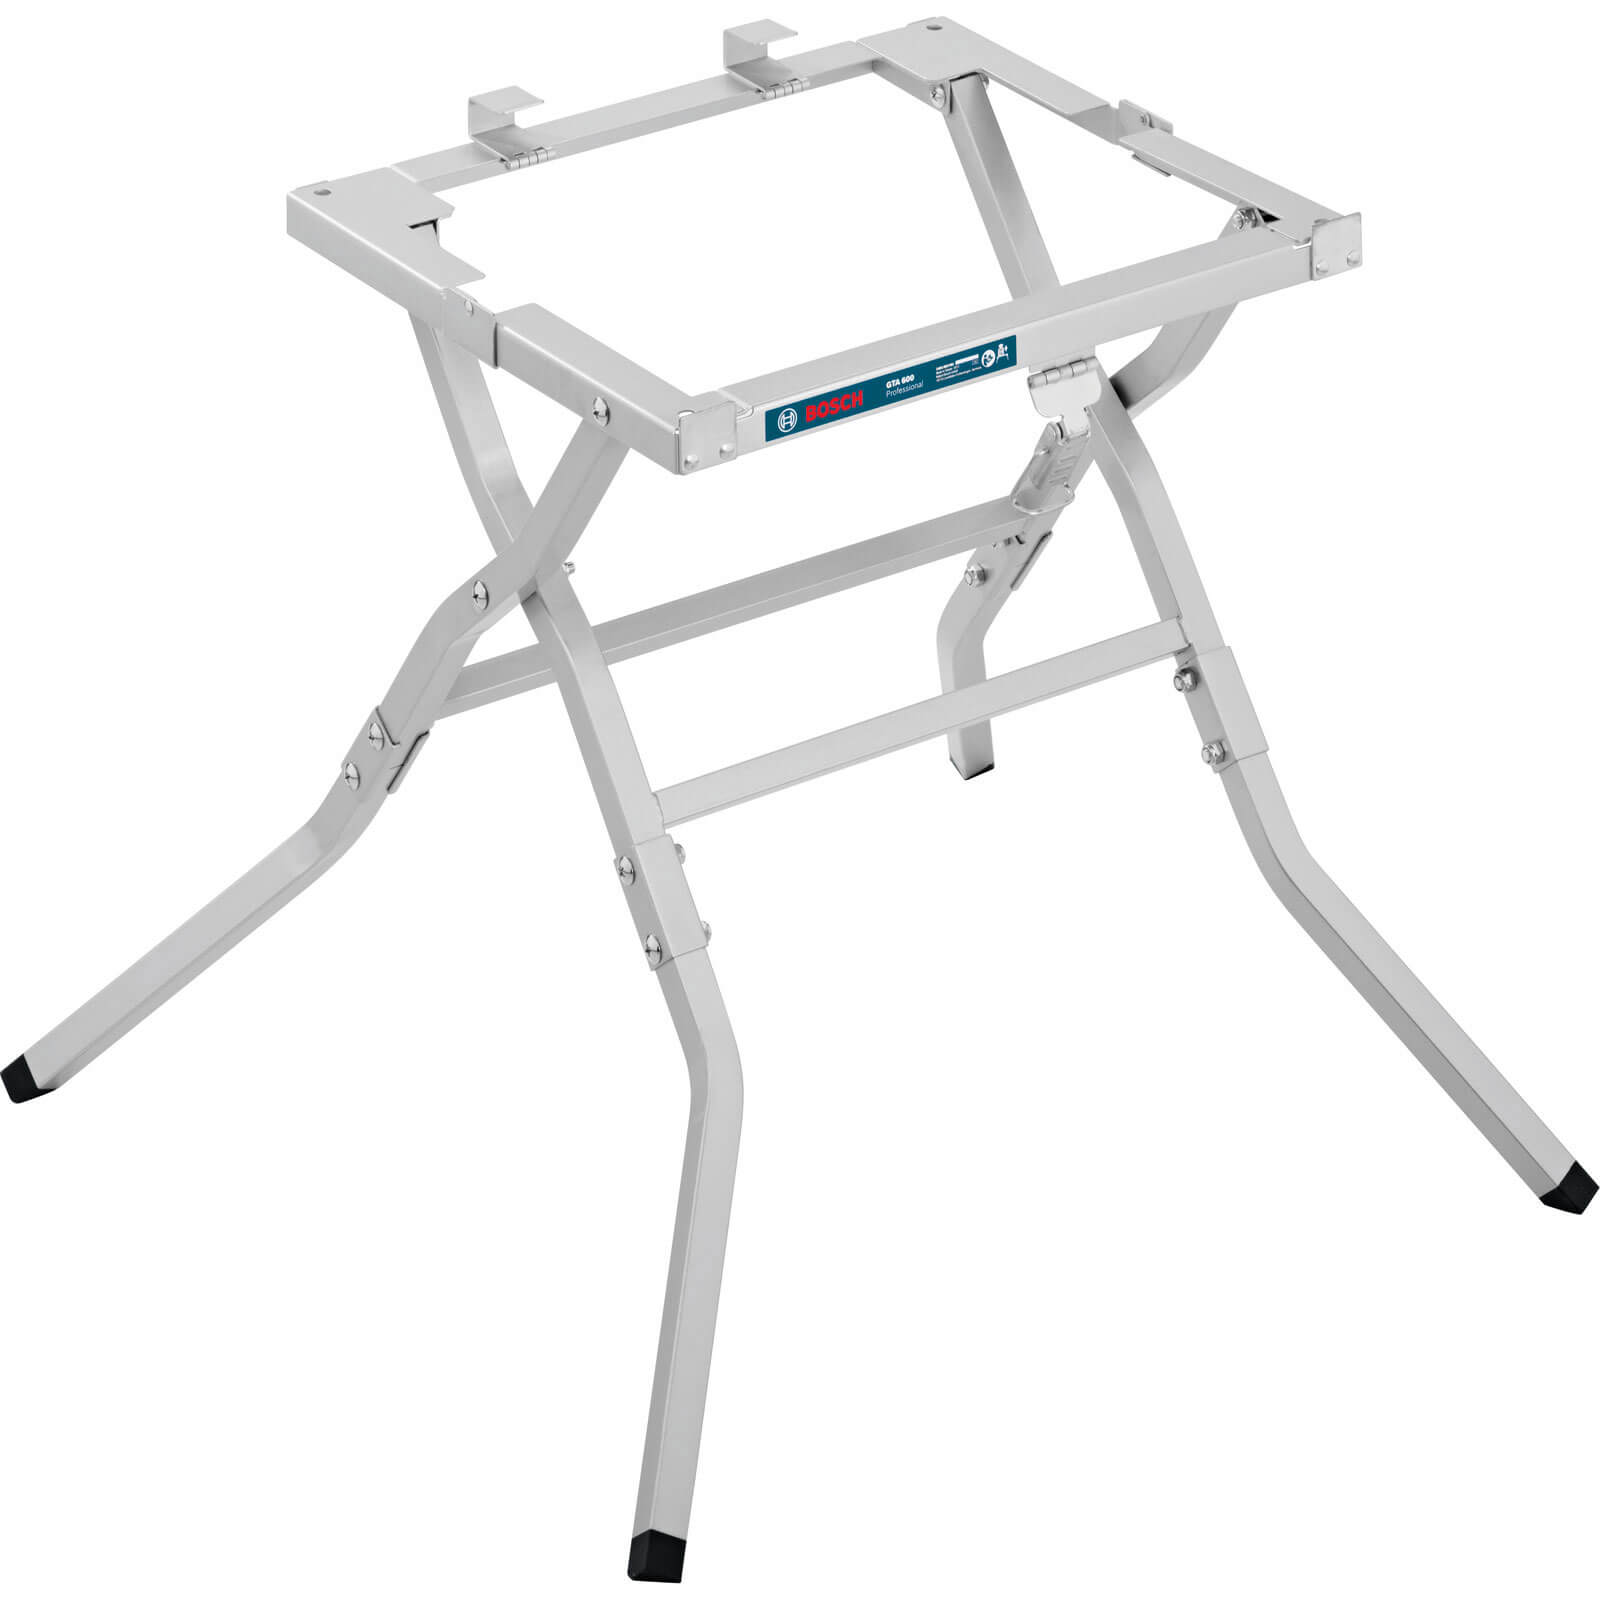 Photos - Power Tool Accessory Bosch GTA 600 Stand for GTS 10 J Table Saws 